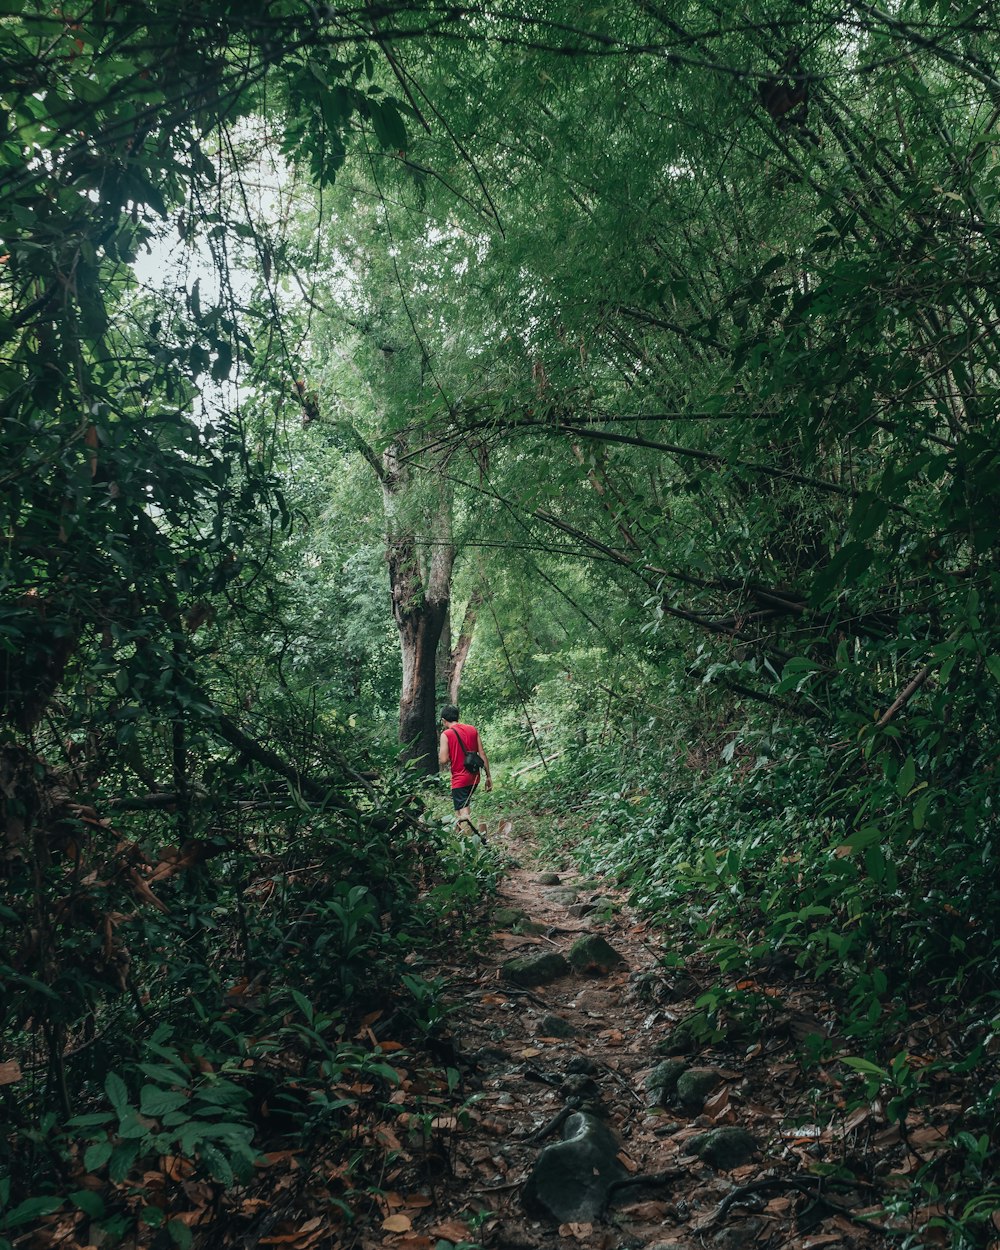 person in red jacket walking on dirt path between green trees during daytime